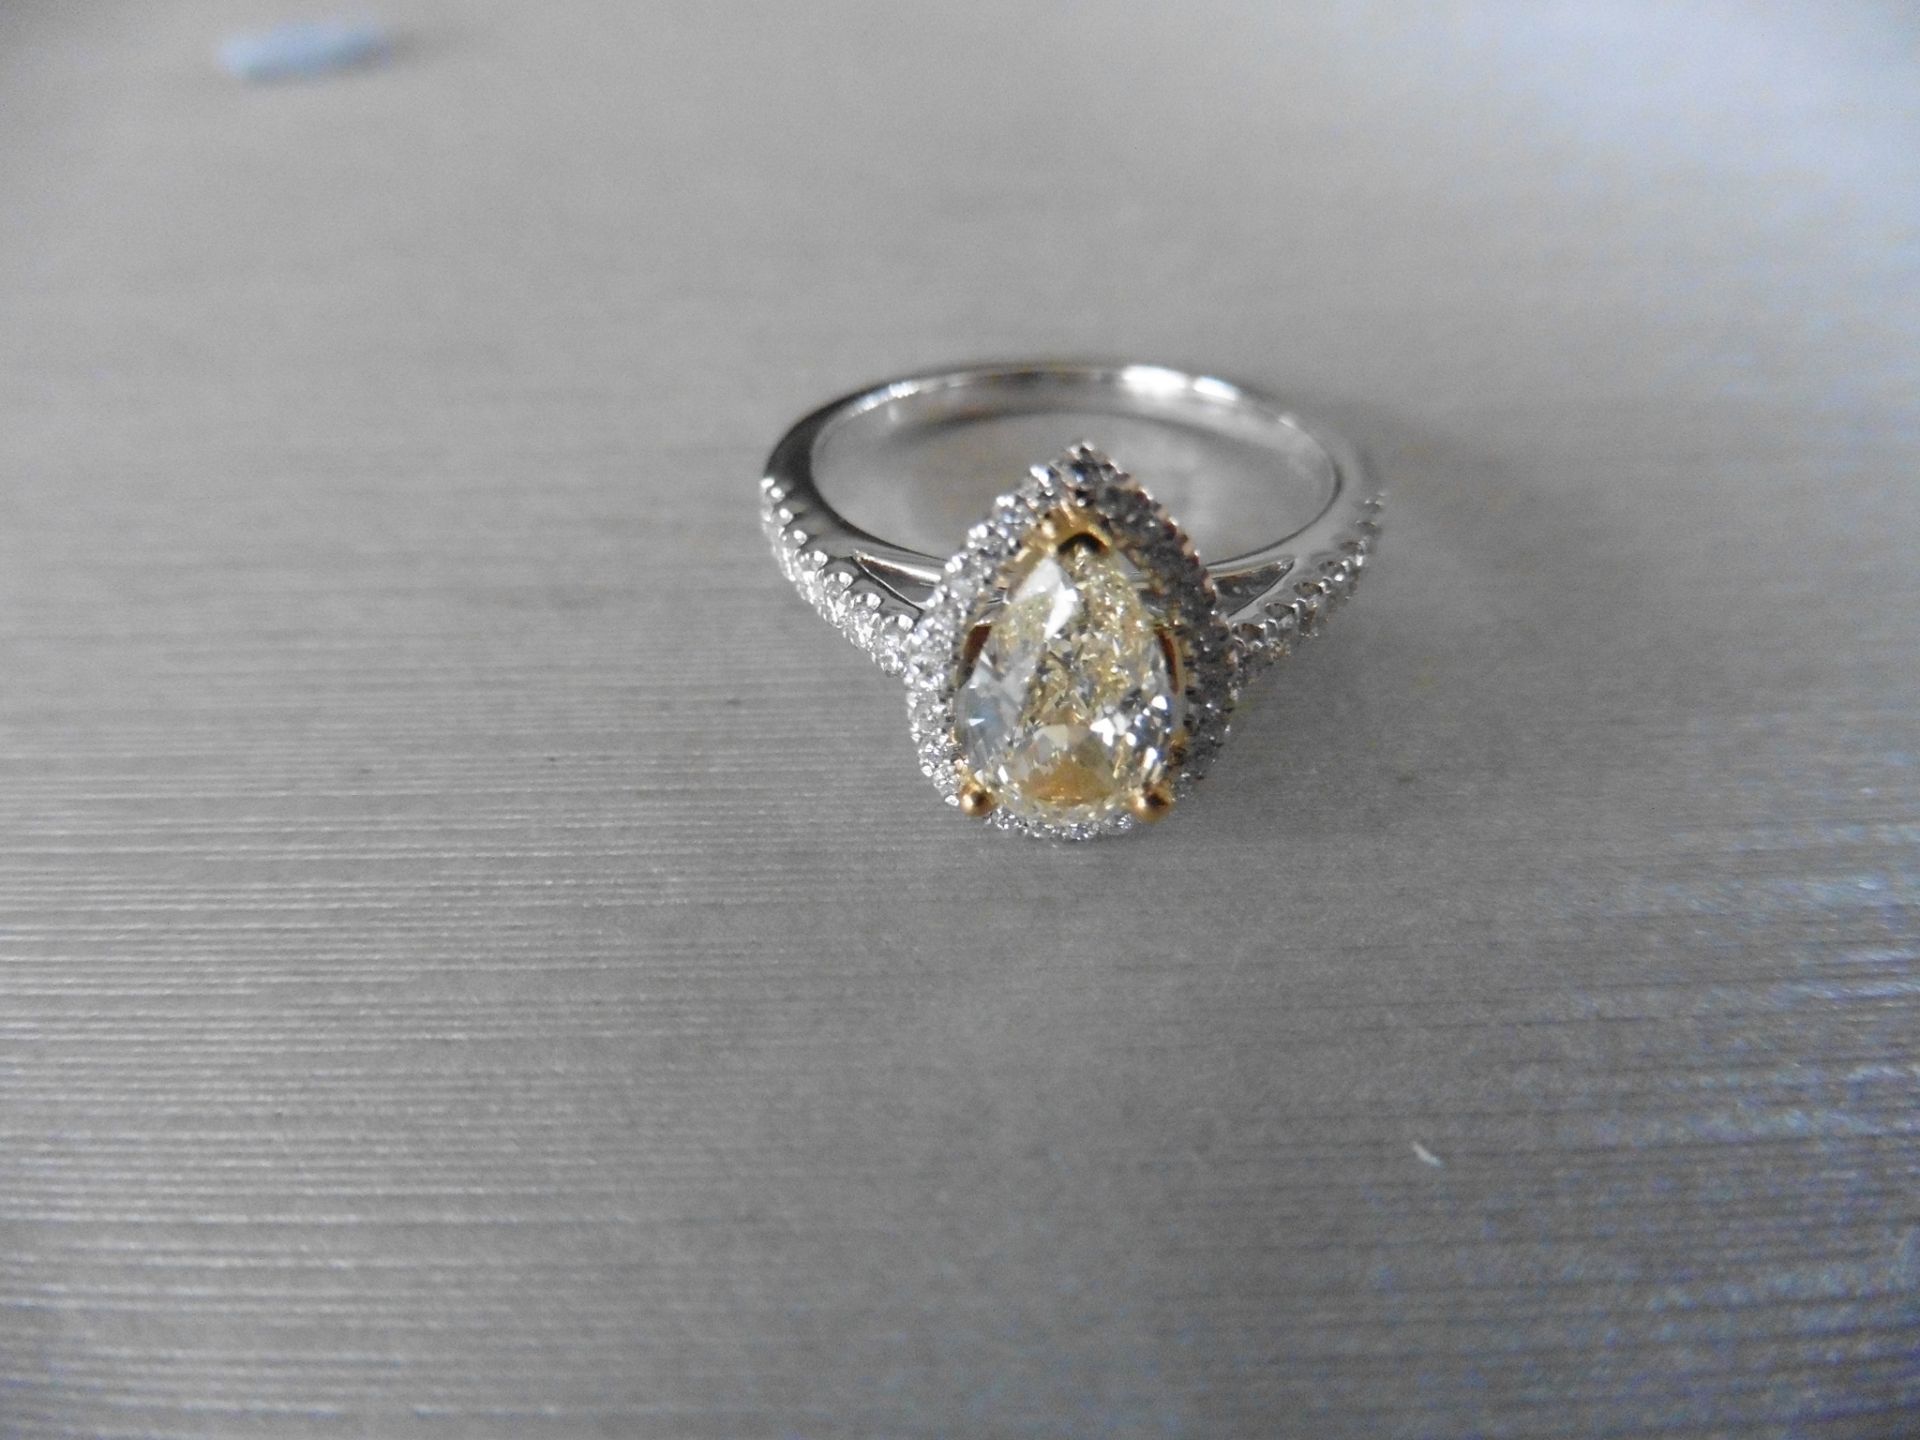 0.75ct yellow pear shaped diamond set solitaire ring. Has a halo setting of small brilliant cut